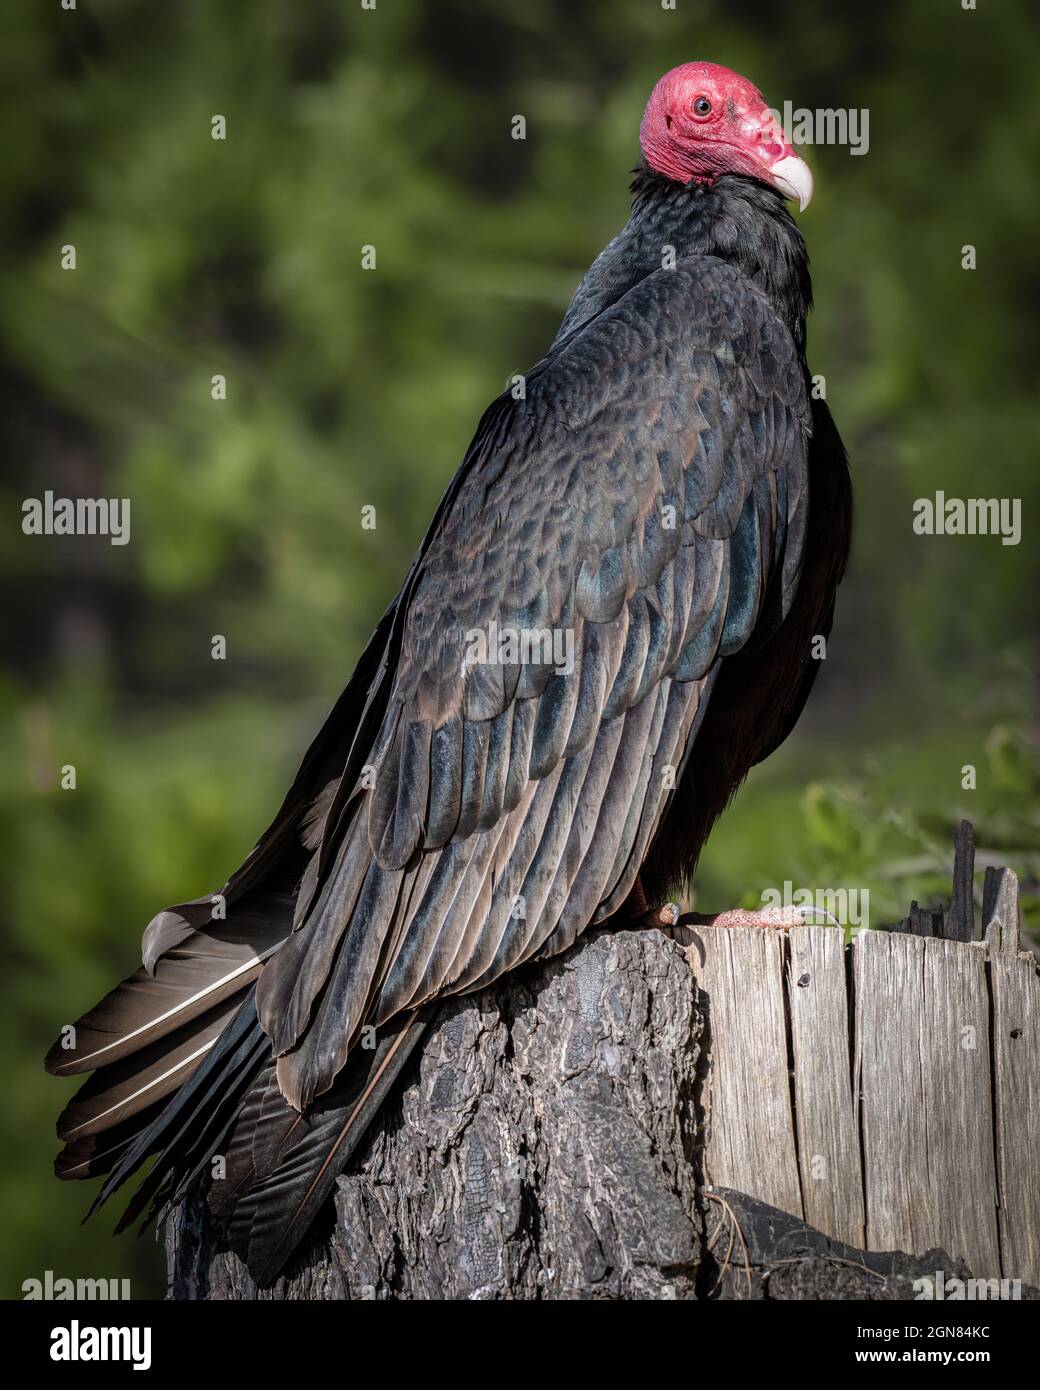 Vertical shot of a Turkey Vulture perching on an old cut tree trunk against a blurred background Stock Photo